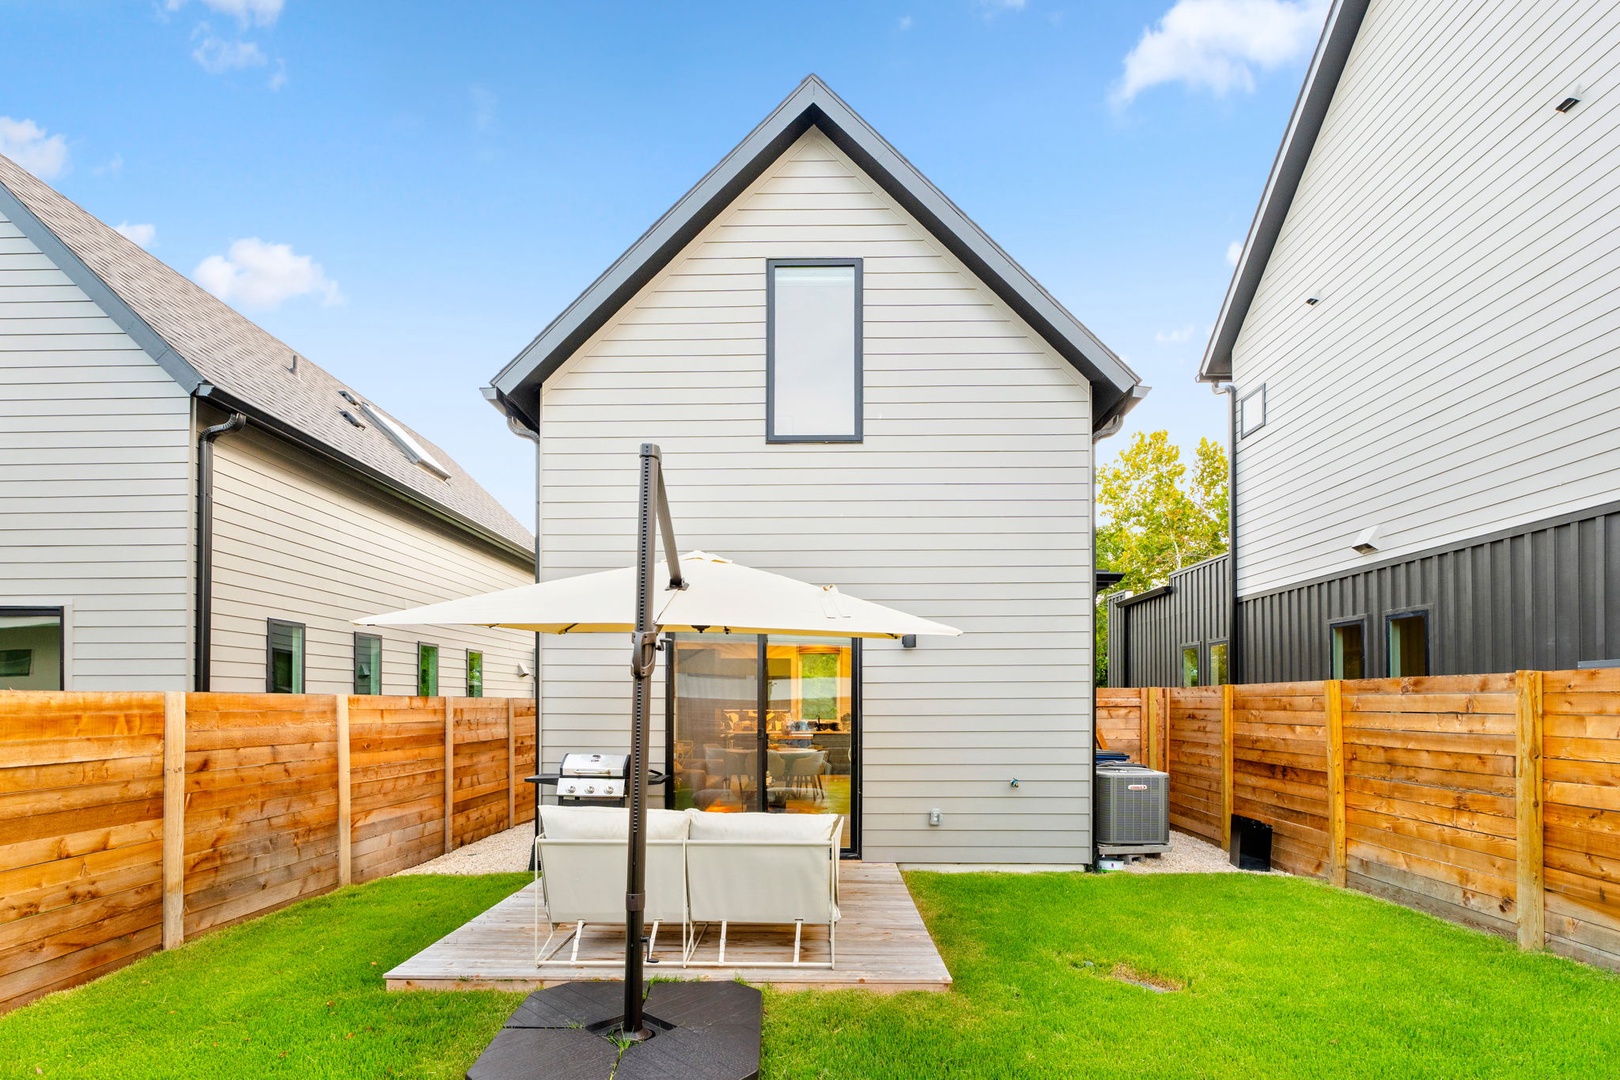 Lounge & take in the sunshine in the spacious, fenced back yard